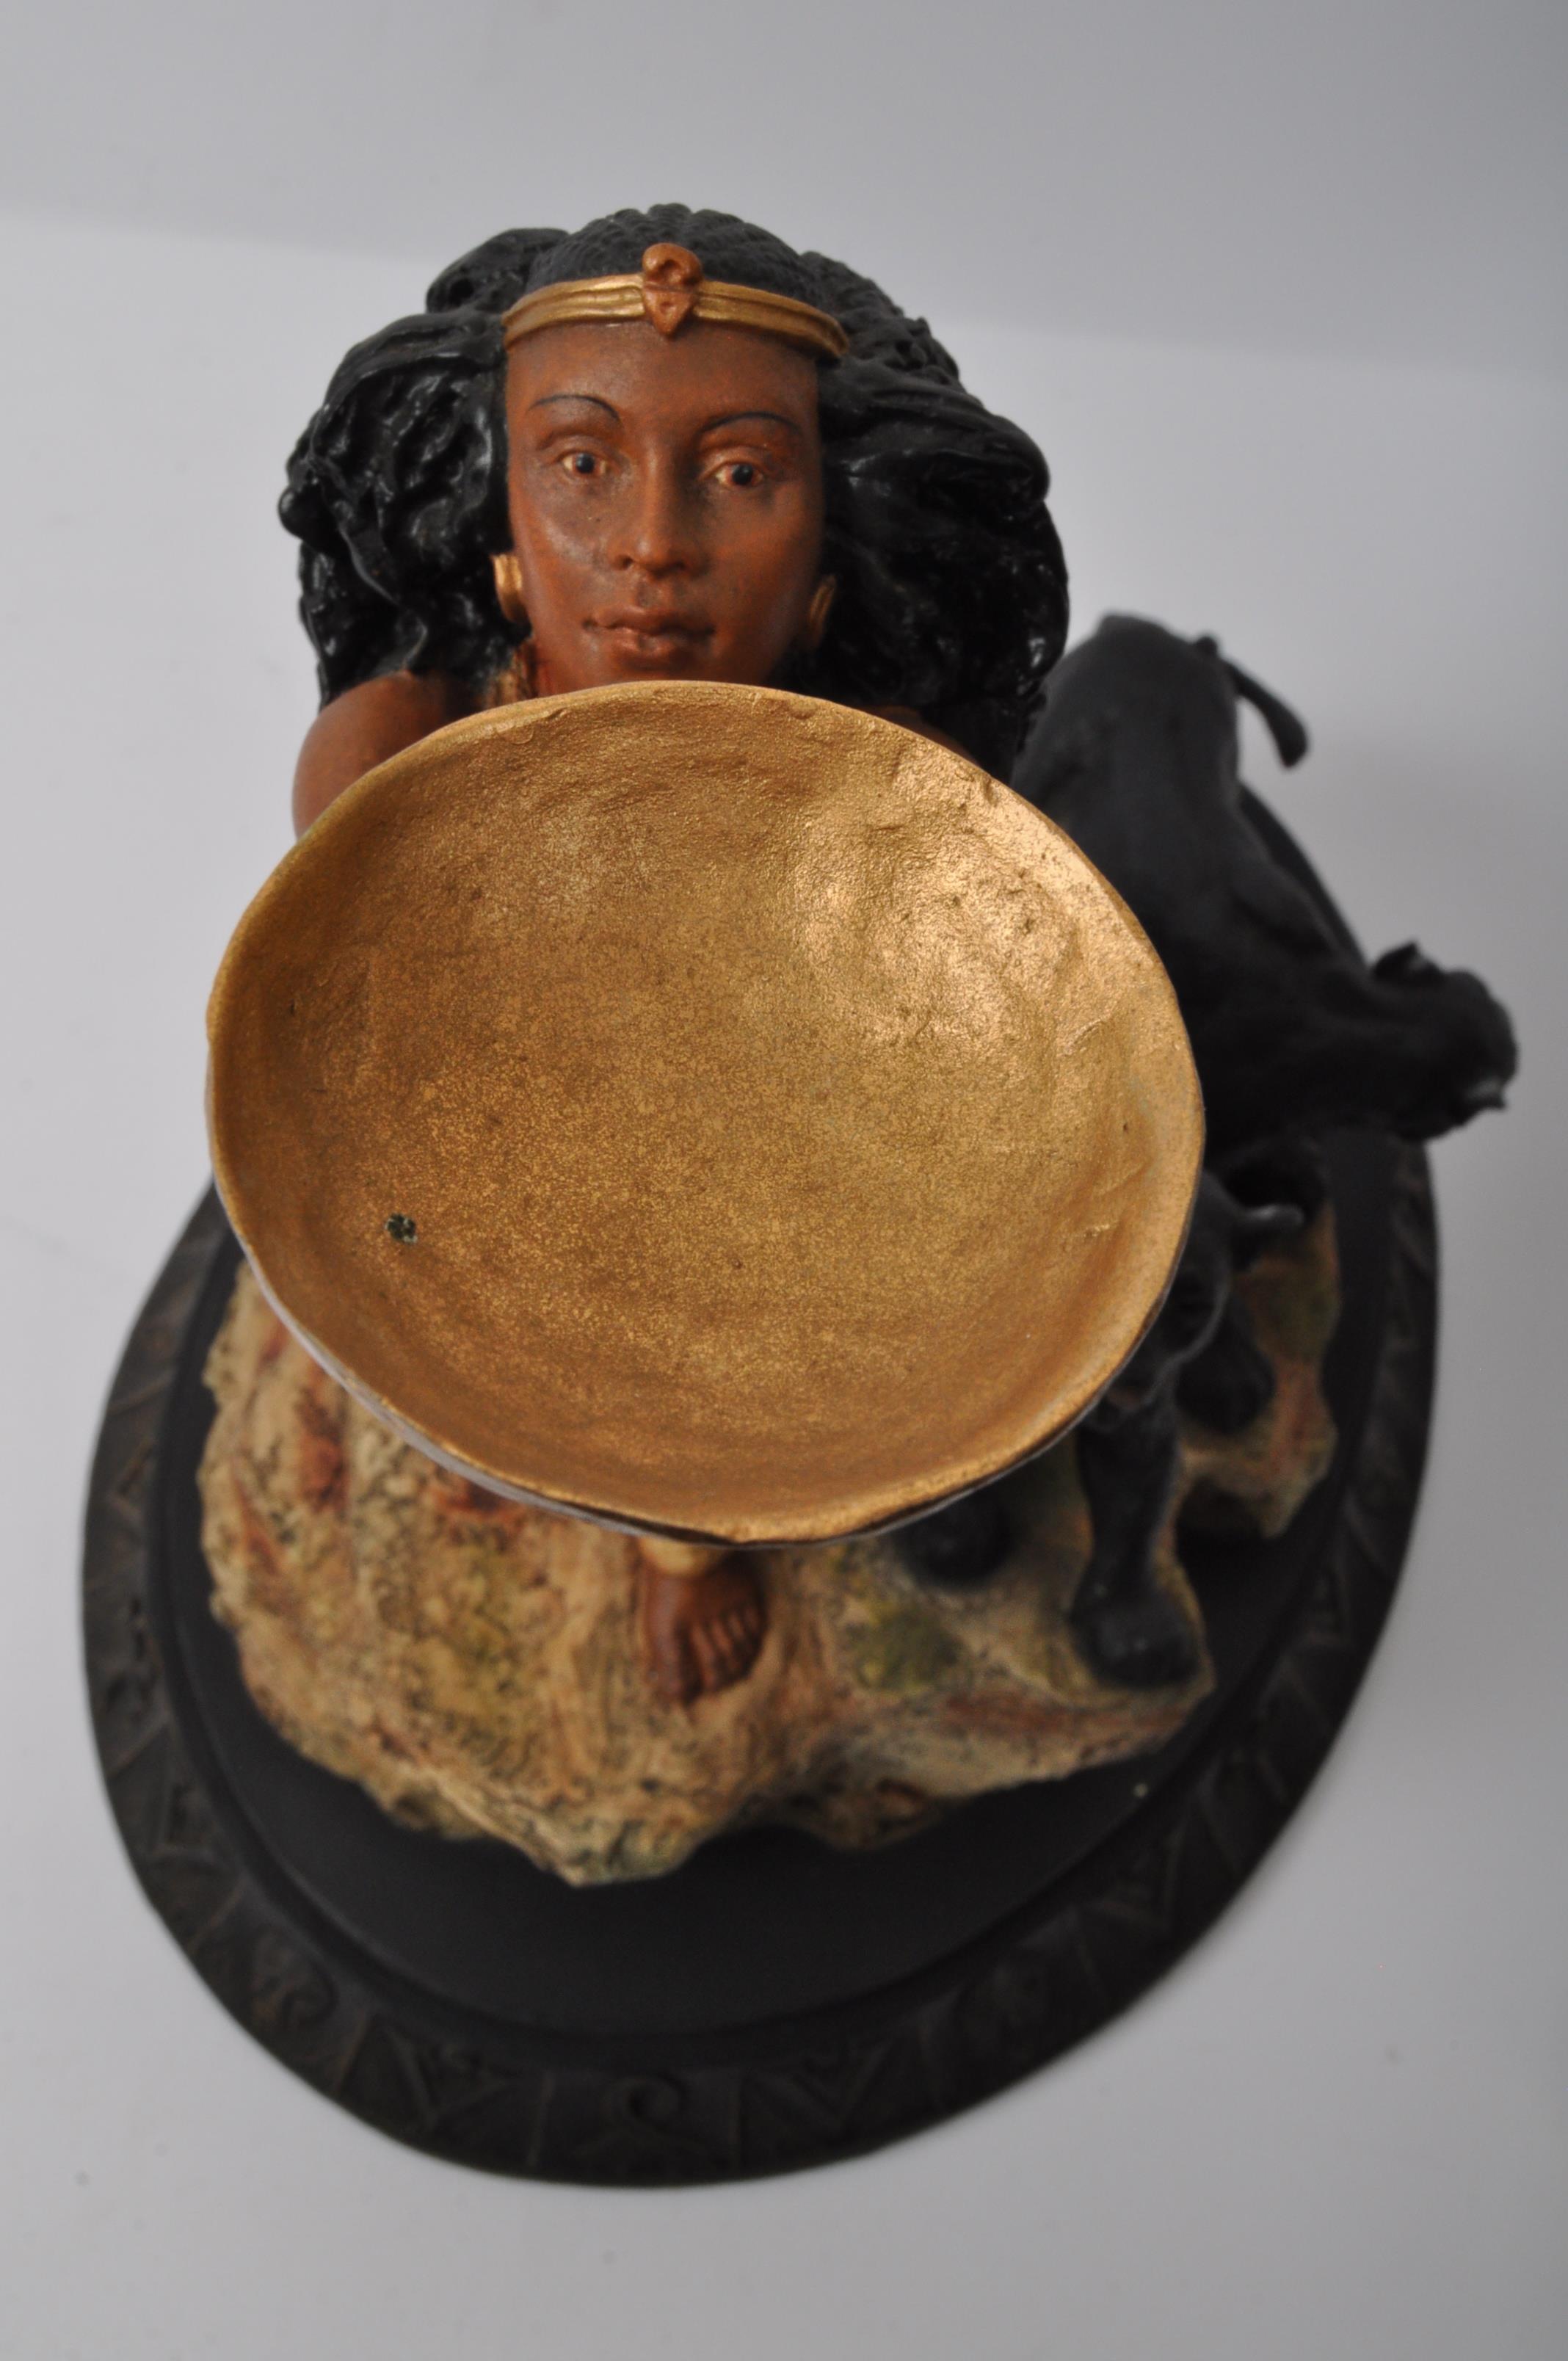 NOS COUNTRY ARTISTS 'PRIESTESS OF THE RAINS' LARGE SCULPTURE - Image 6 of 6